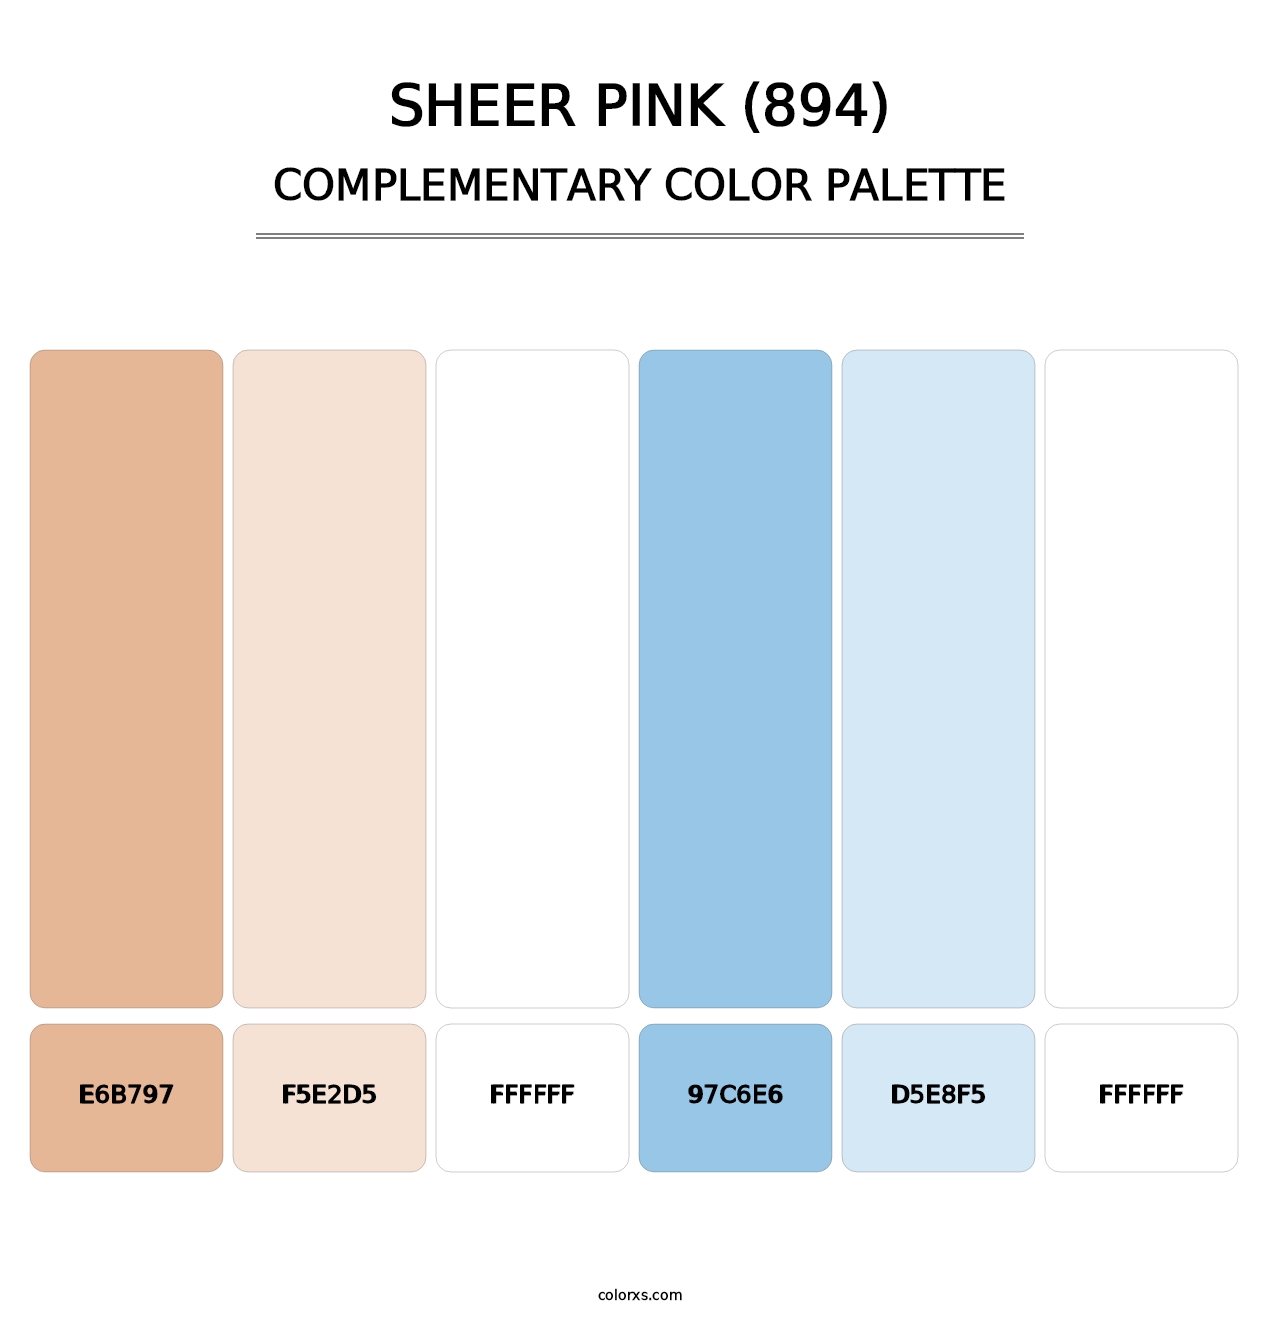 Sheer Pink (894) - Complementary Color Palette